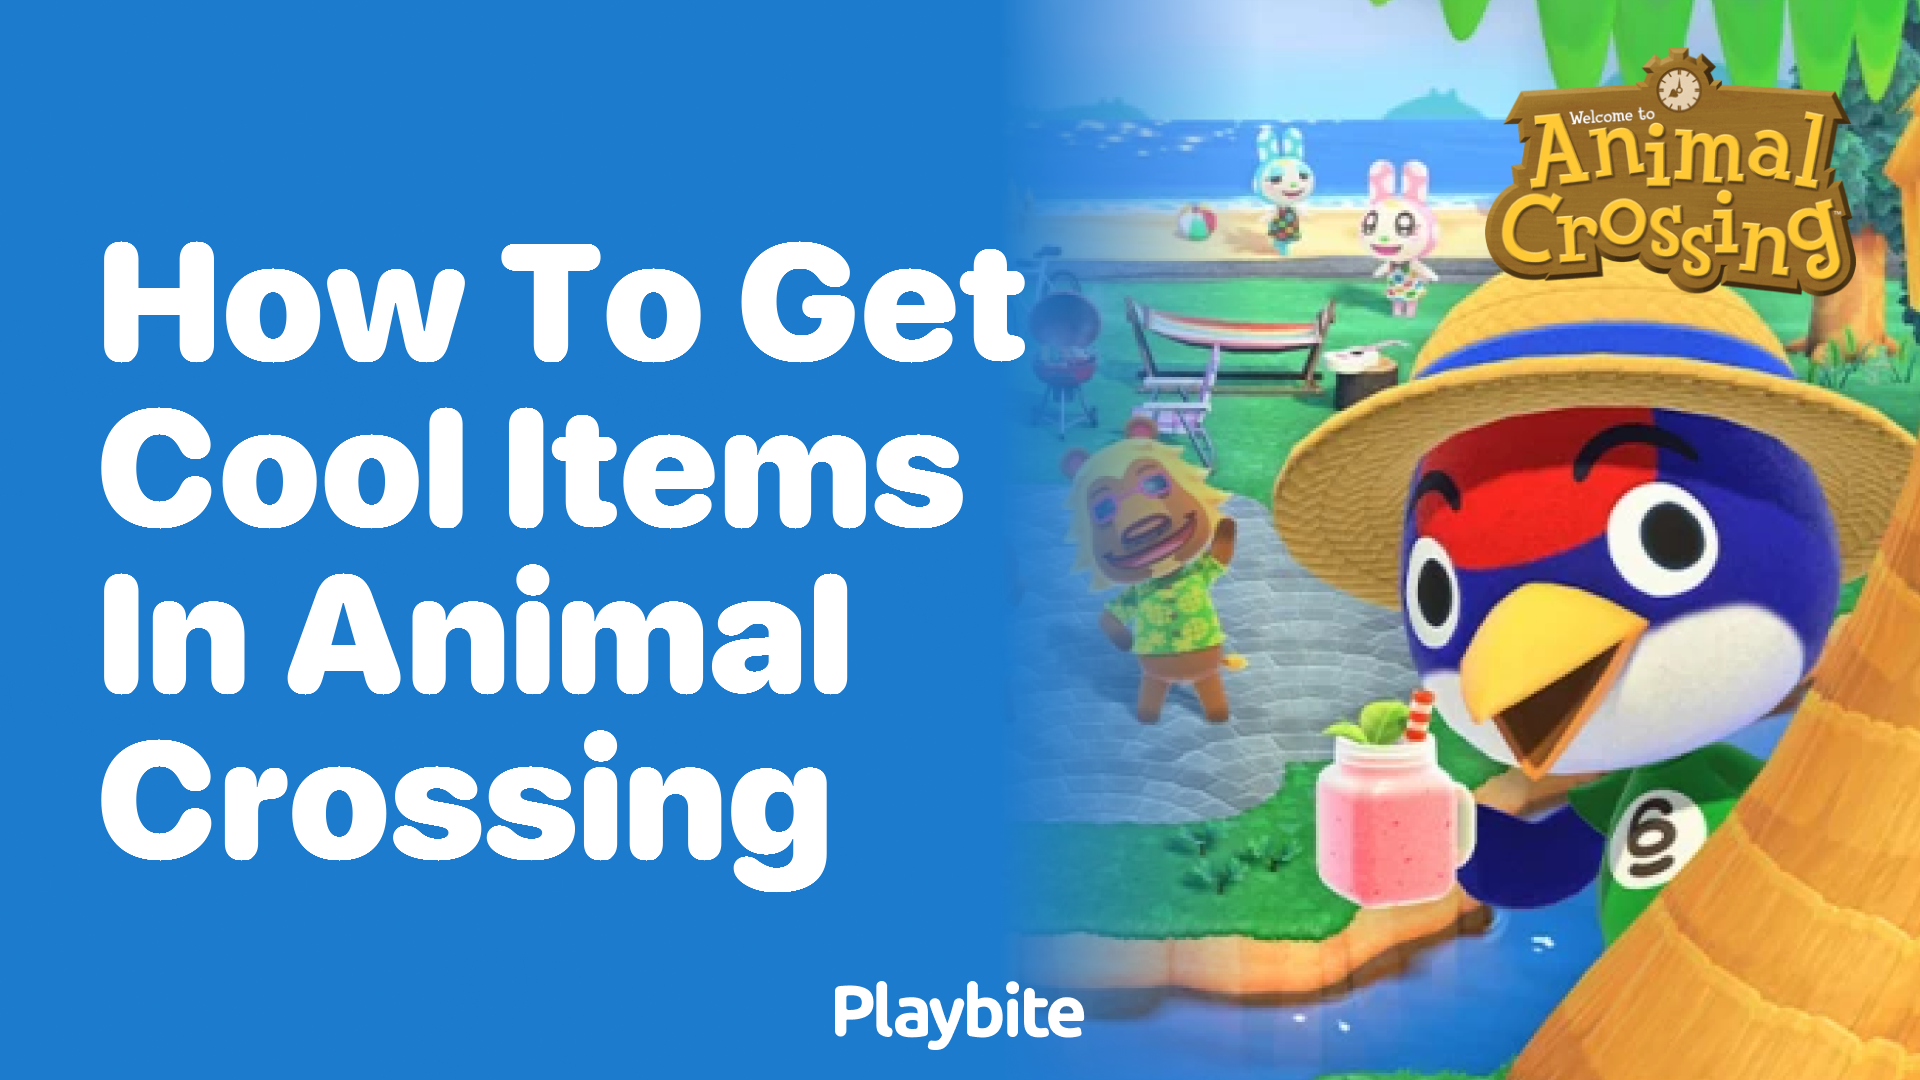 How to Get Cool Items in Animal Crossing